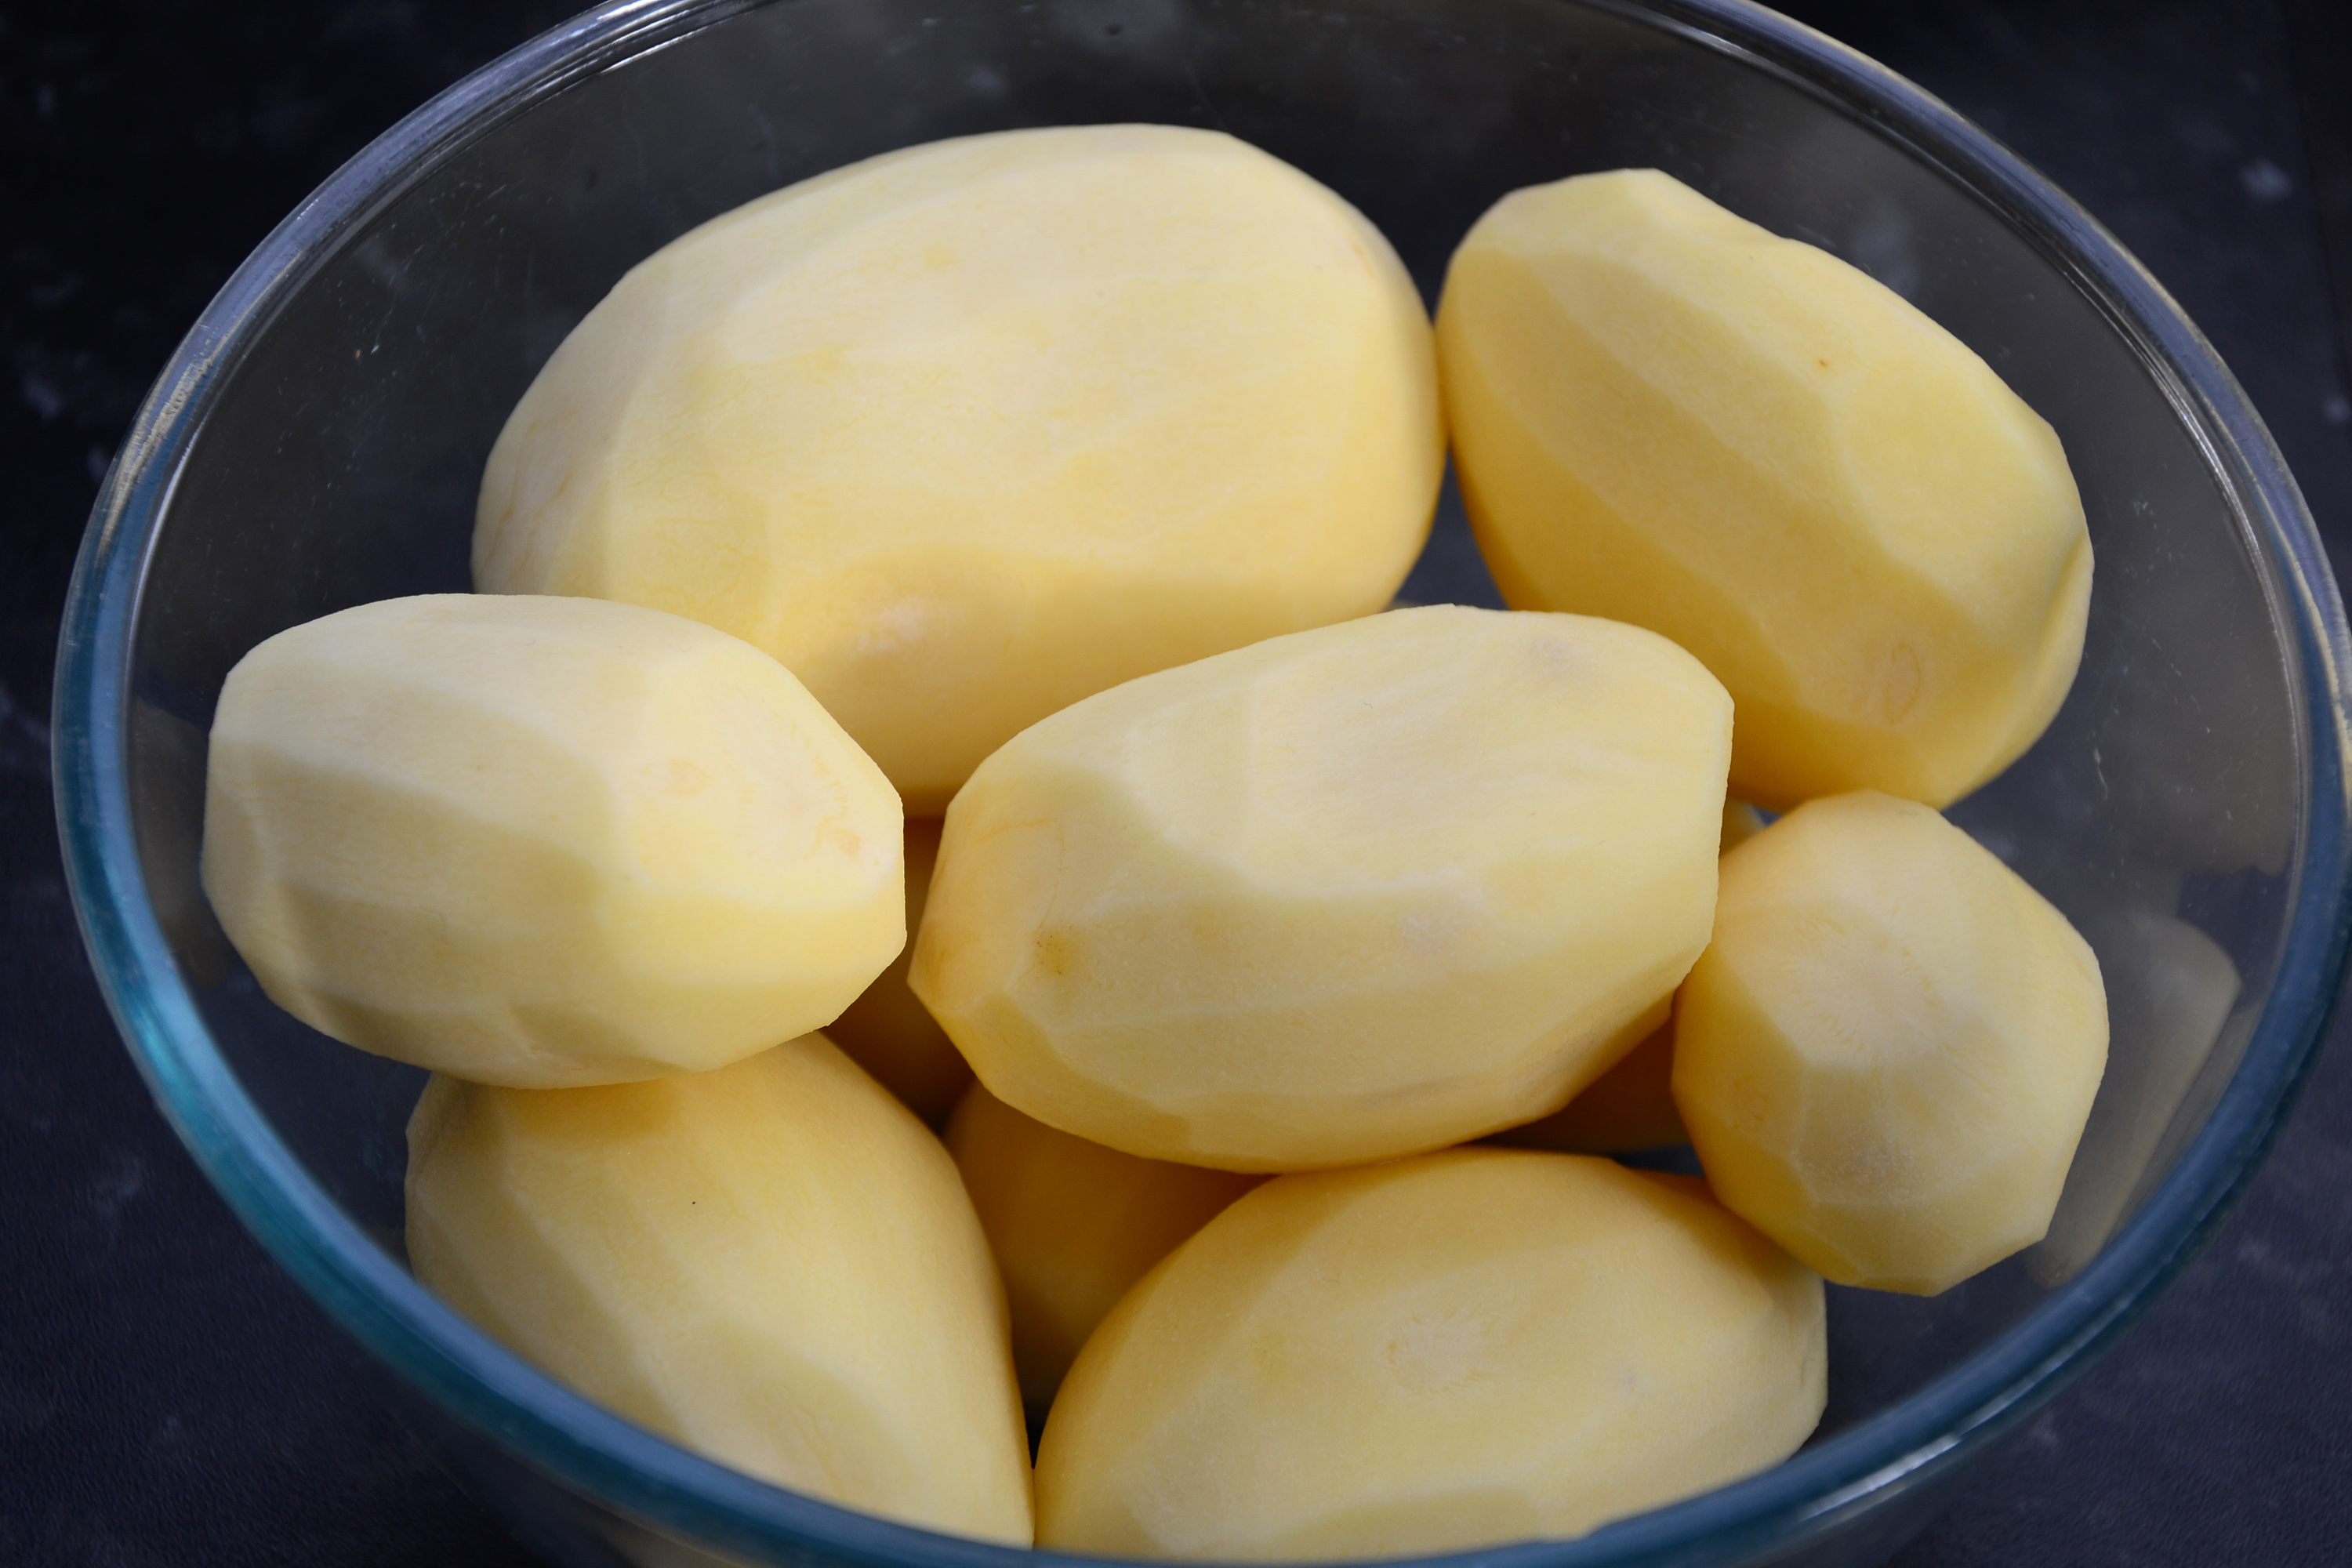 Peeled potatoes in a bowl photo